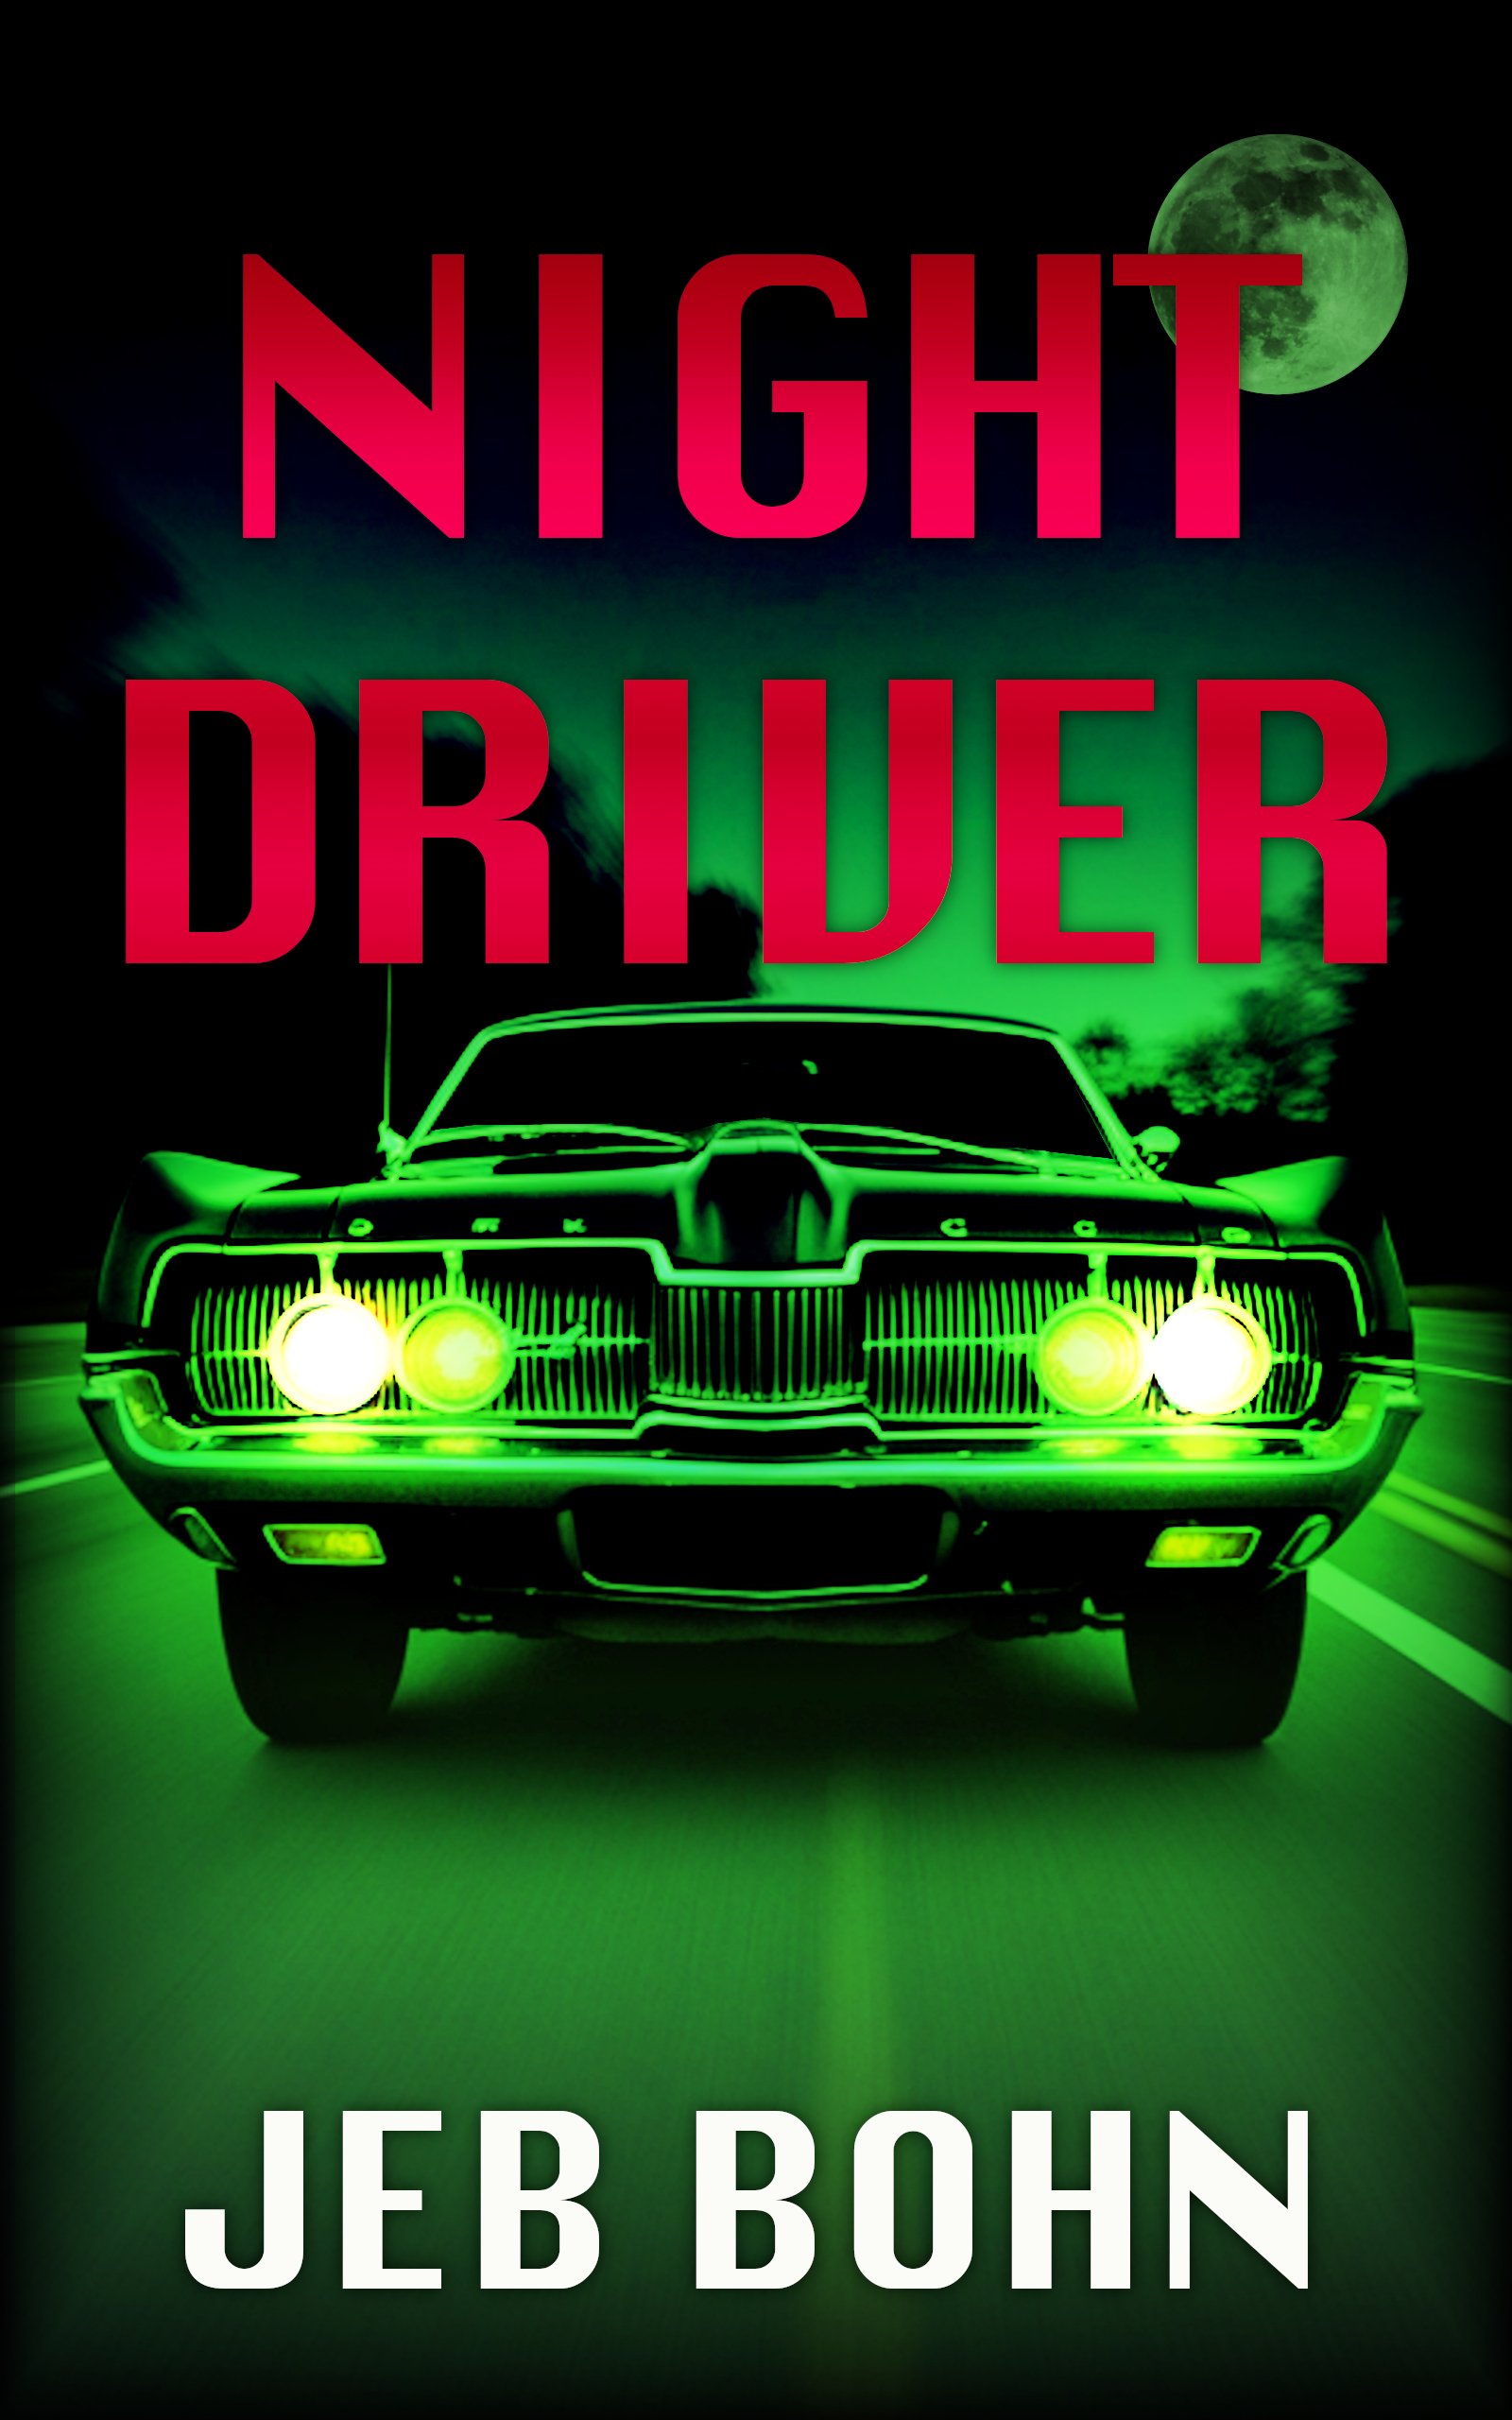 Coming soon: Night Driver